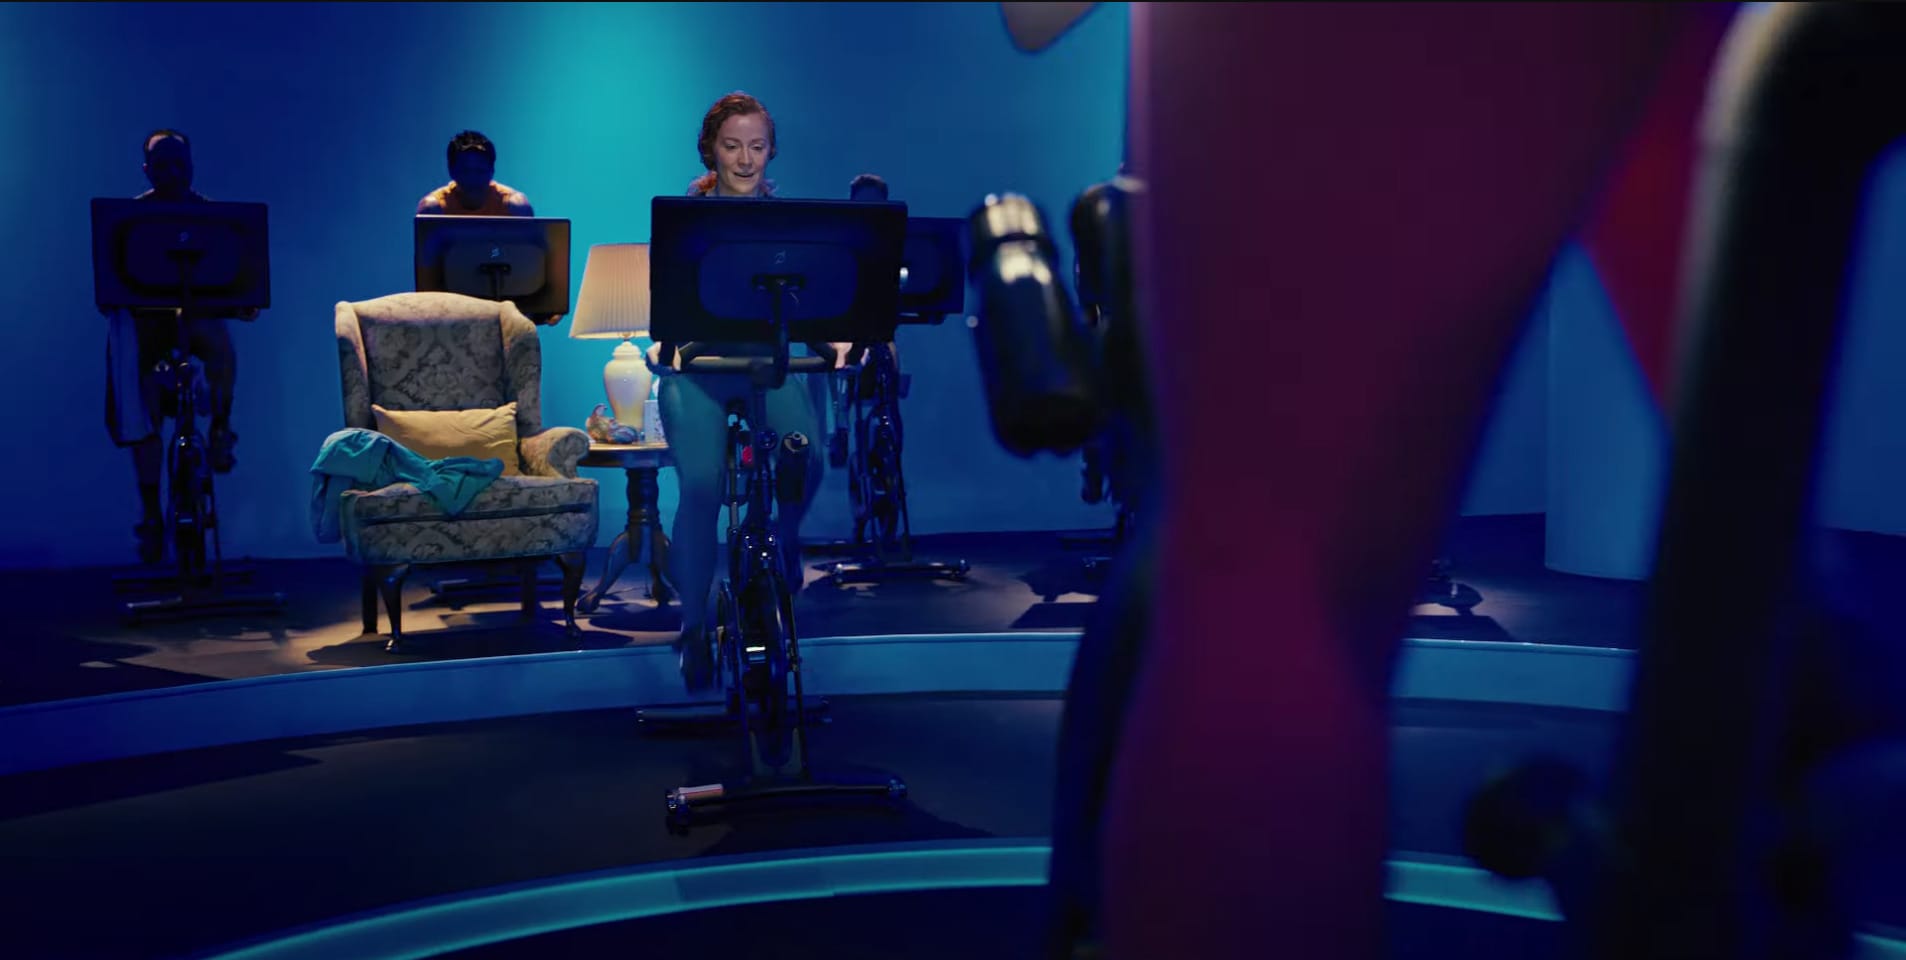 Peloton Releases 2023 New Year's Commercial "It’s Not What You Think